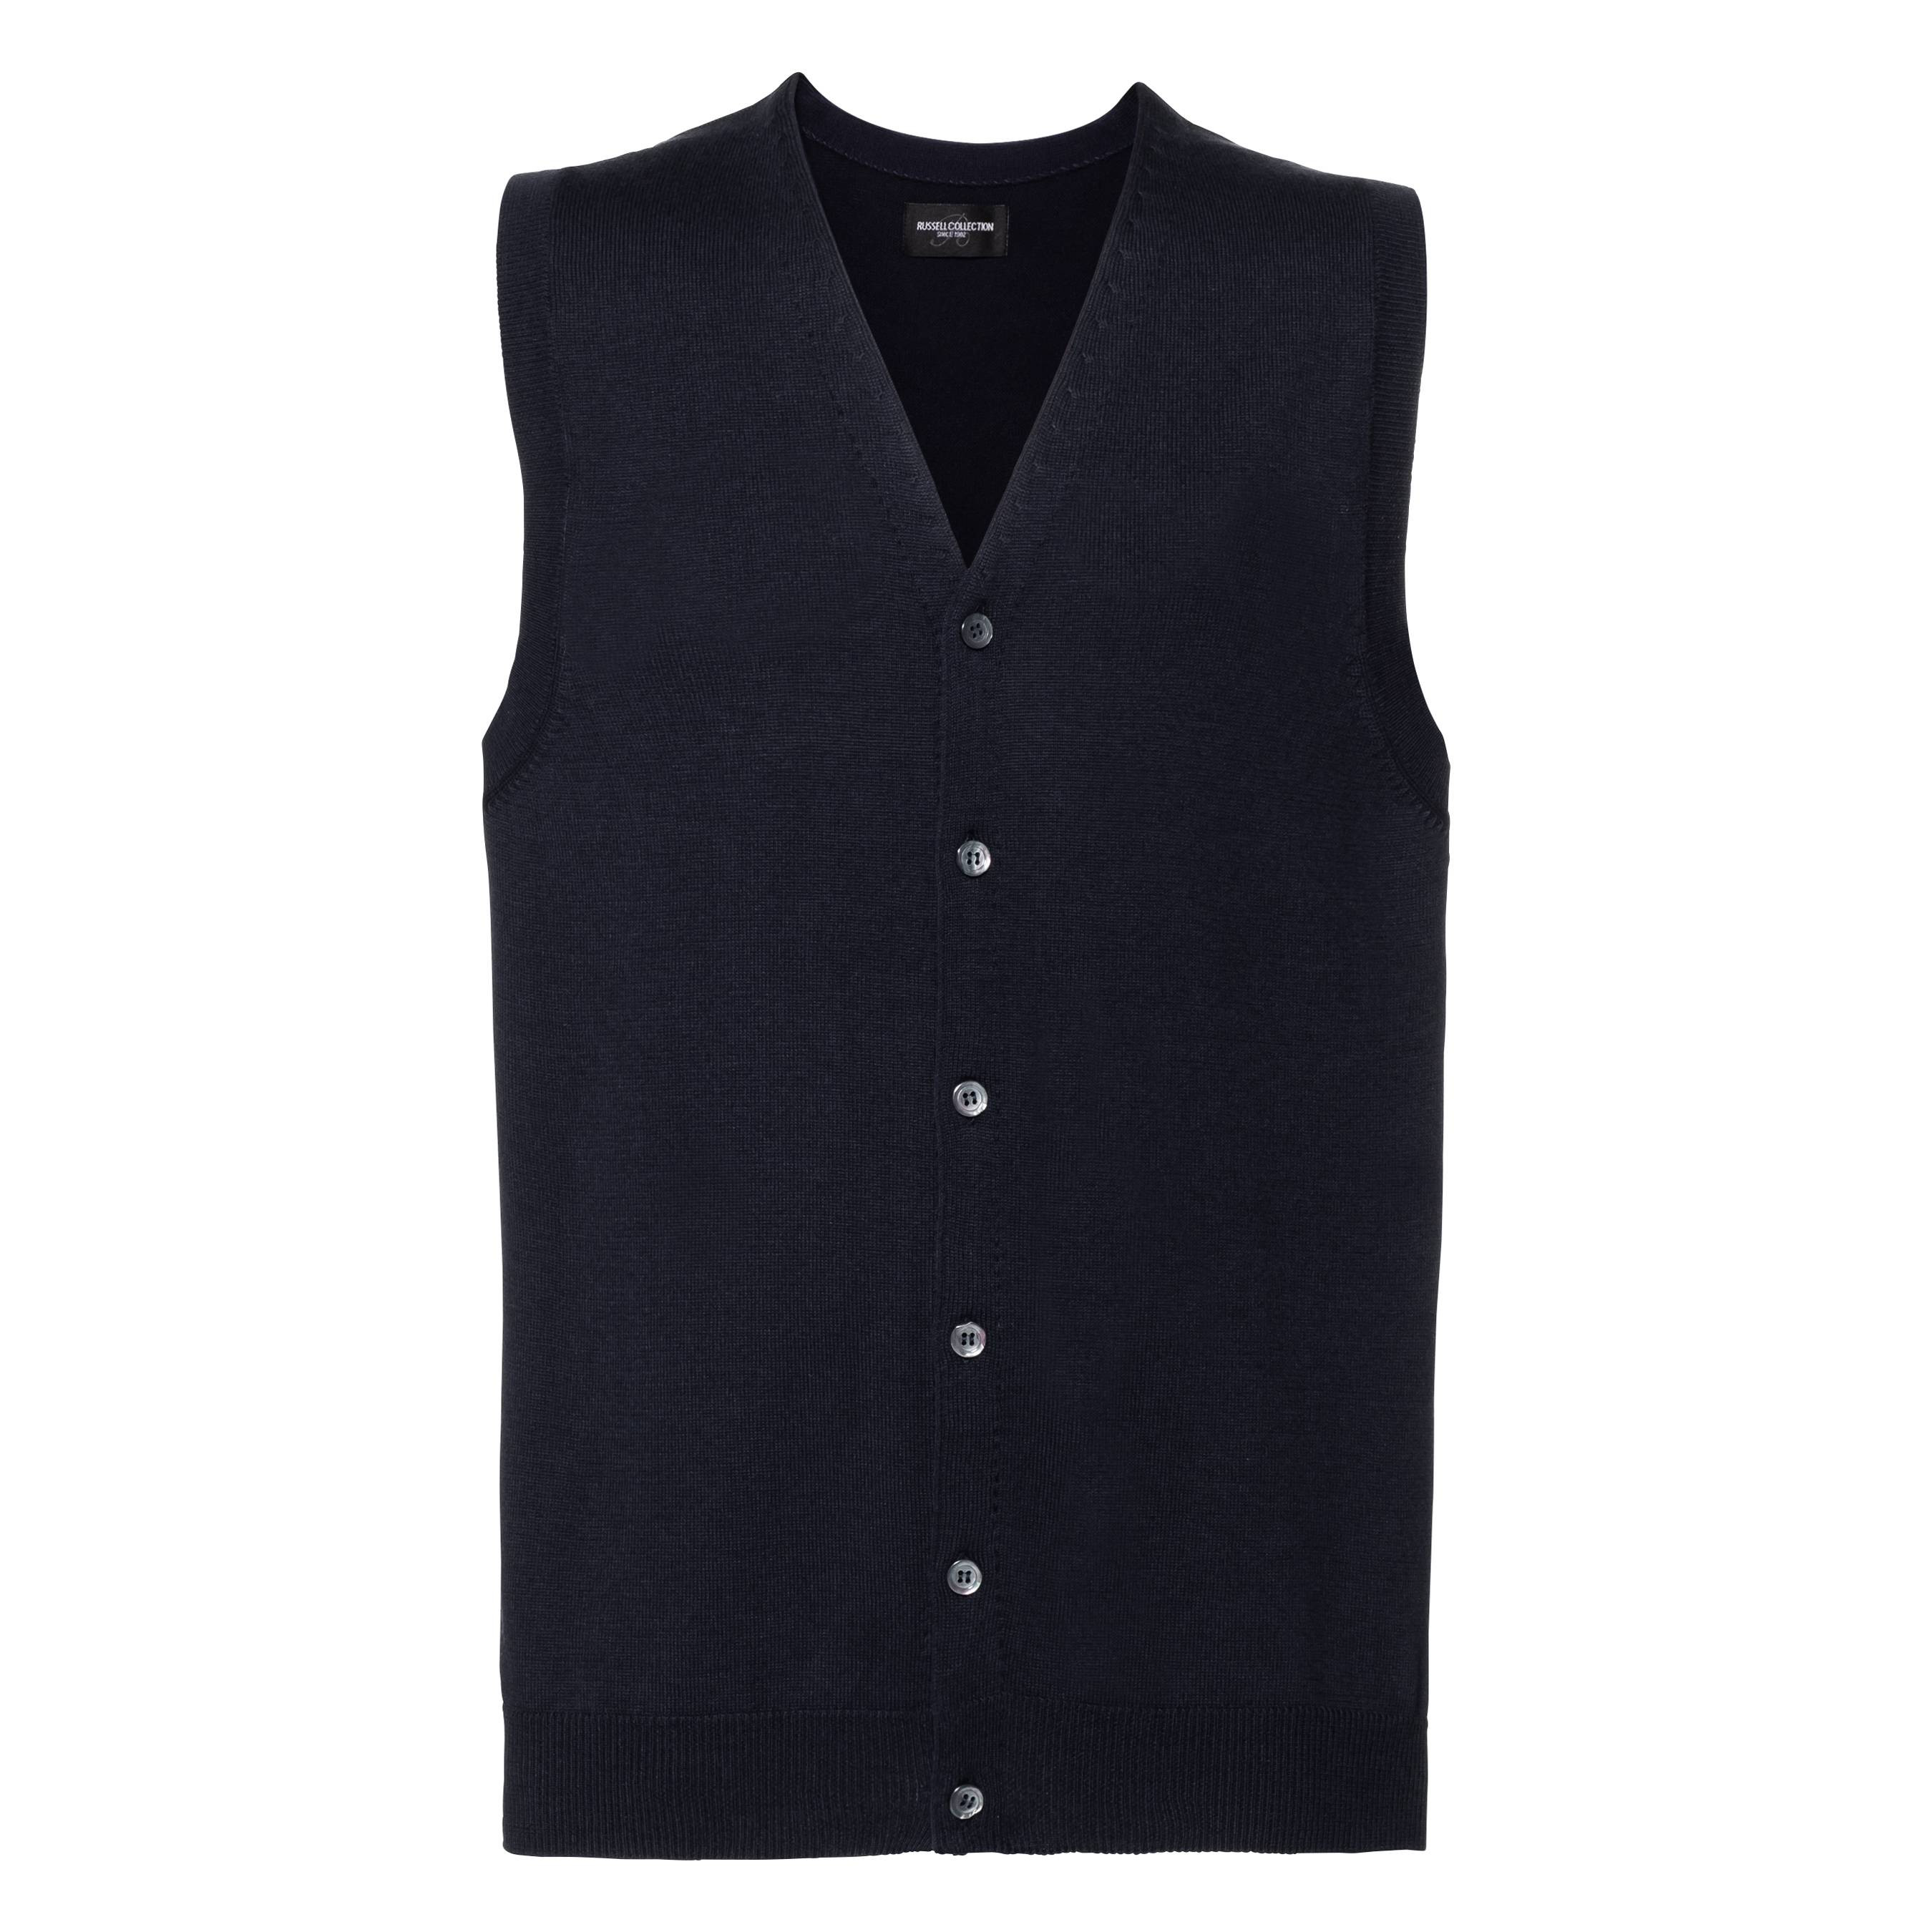 Cardigan sin mangas hombre RUSSELL 719M, compra online